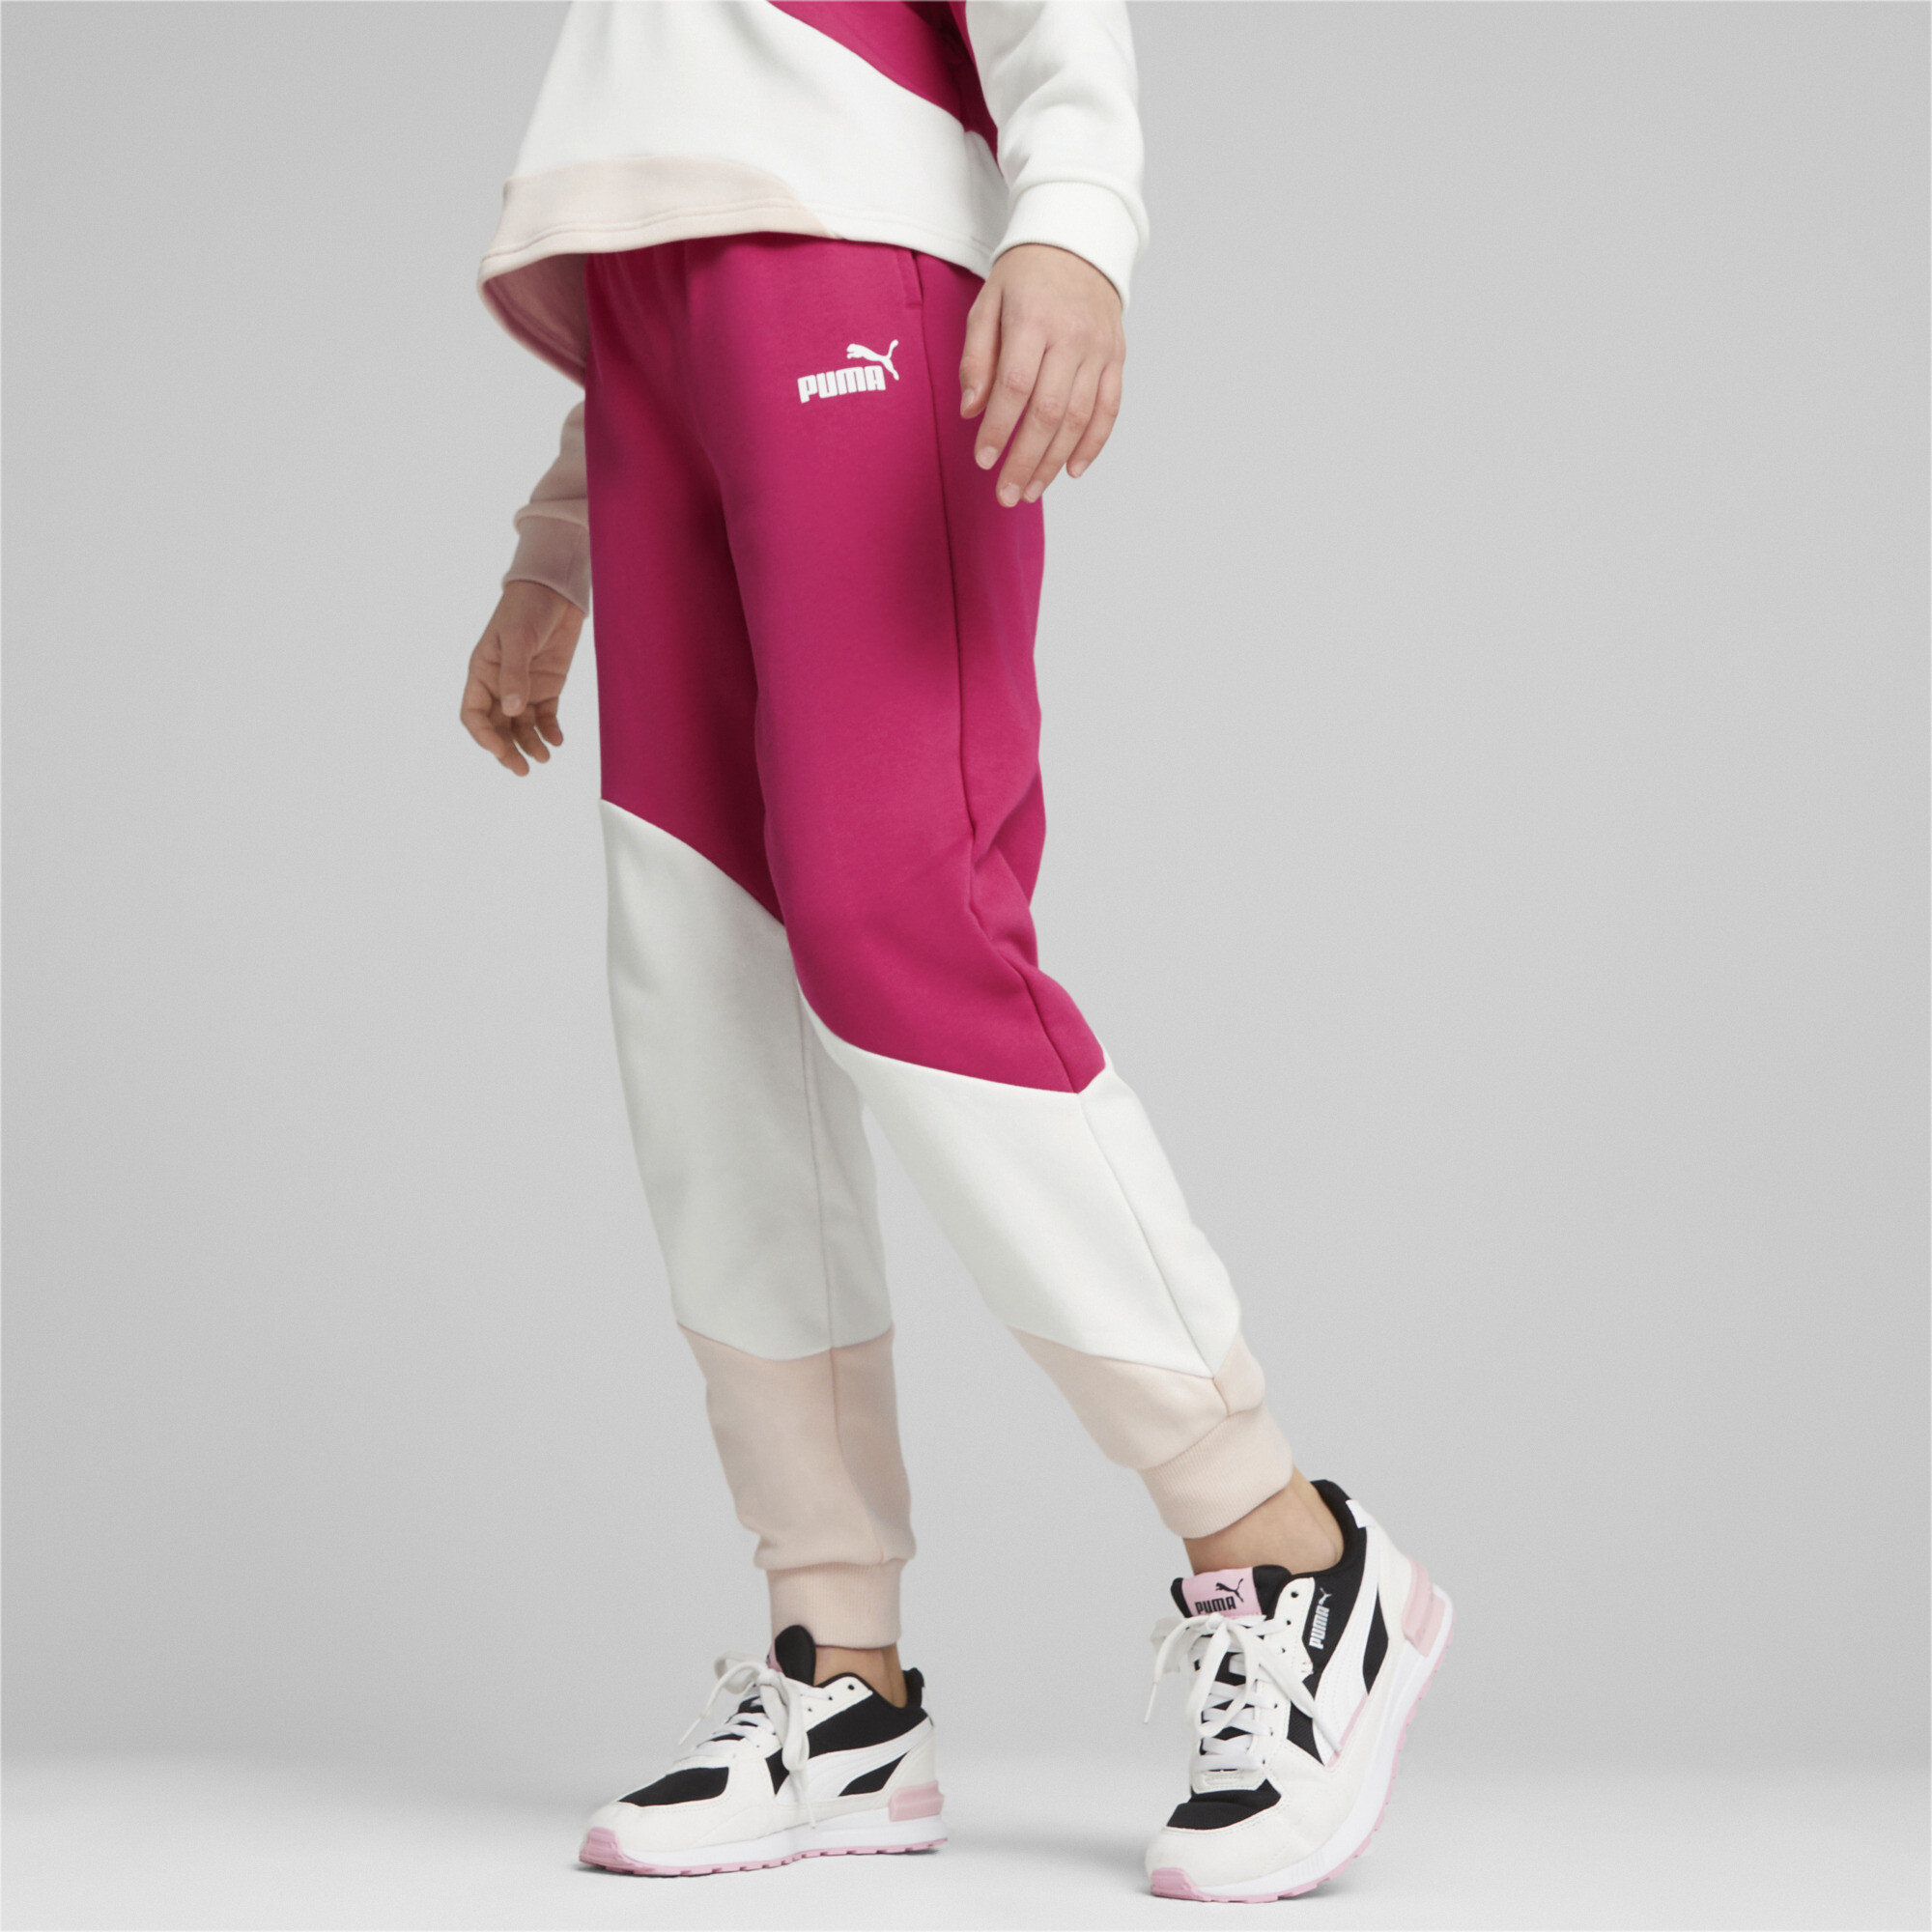 PUMA POWER Cat Pants In Pink, Size 4-5 Youth